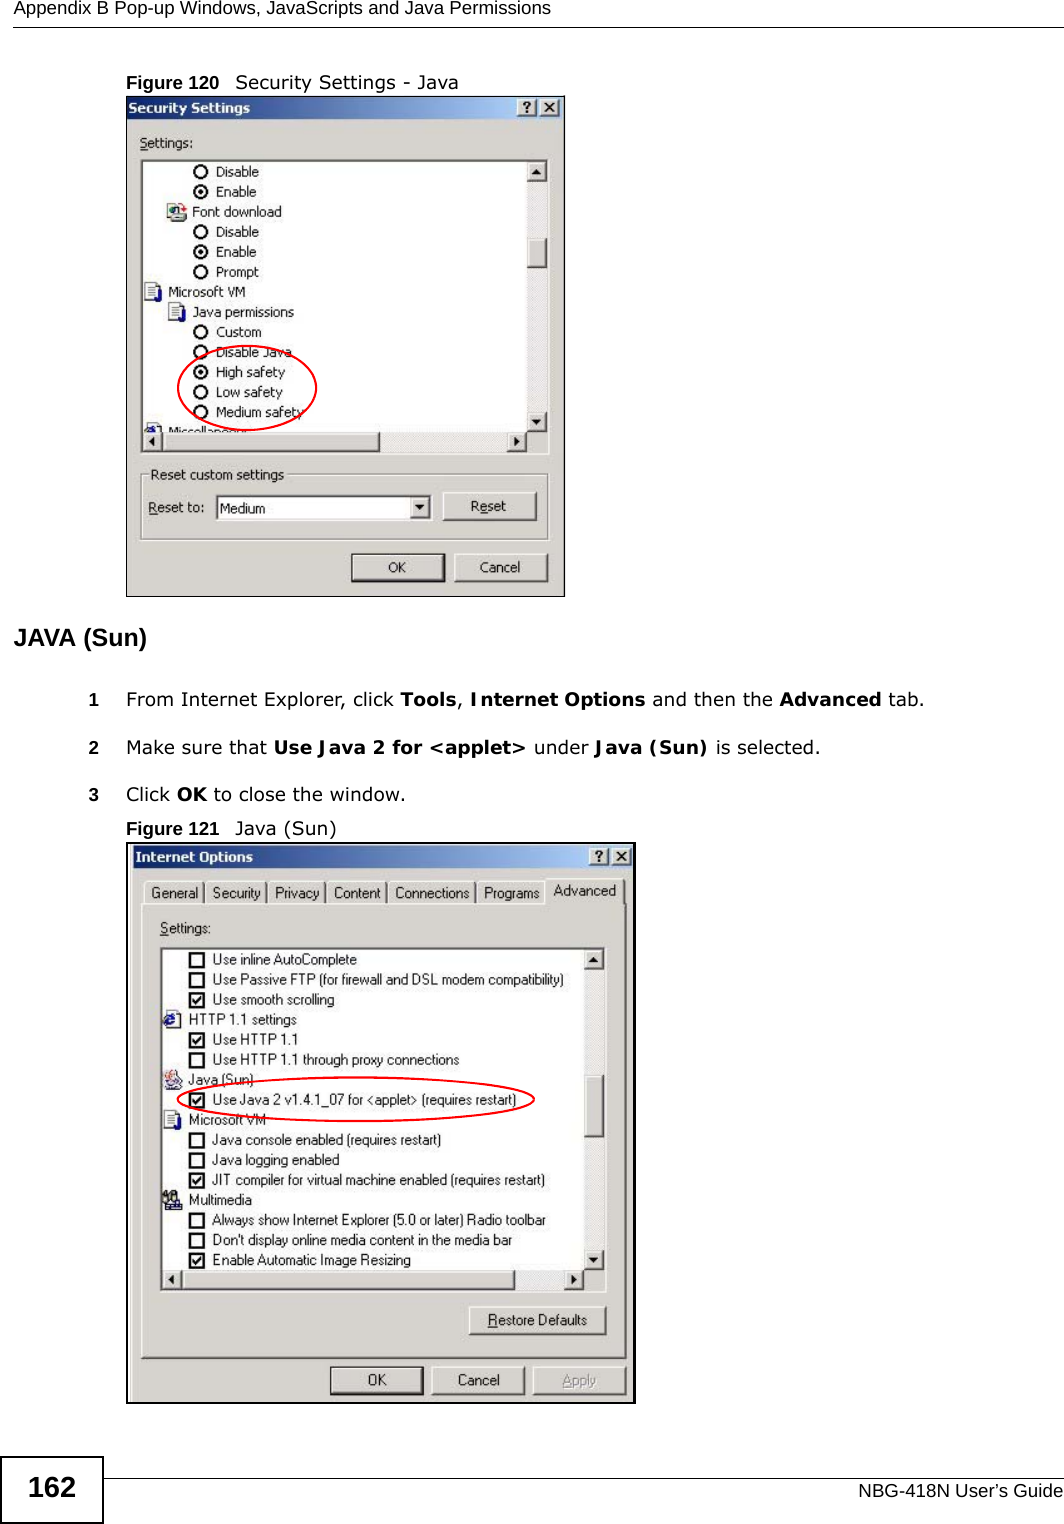 Appendix B Pop-up Windows, JavaScripts and Java PermissionsNBG-418N User’s Guide162Figure 120   Security Settings - Java JAVA (Sun)1From Internet Explorer, click Tools, Internet Options and then the Advanced tab. 2Make sure that Use Java 2 for &lt;applet&gt; under Java (Sun) is selected.3Click OK to close the window.Figure 121   Java (Sun)